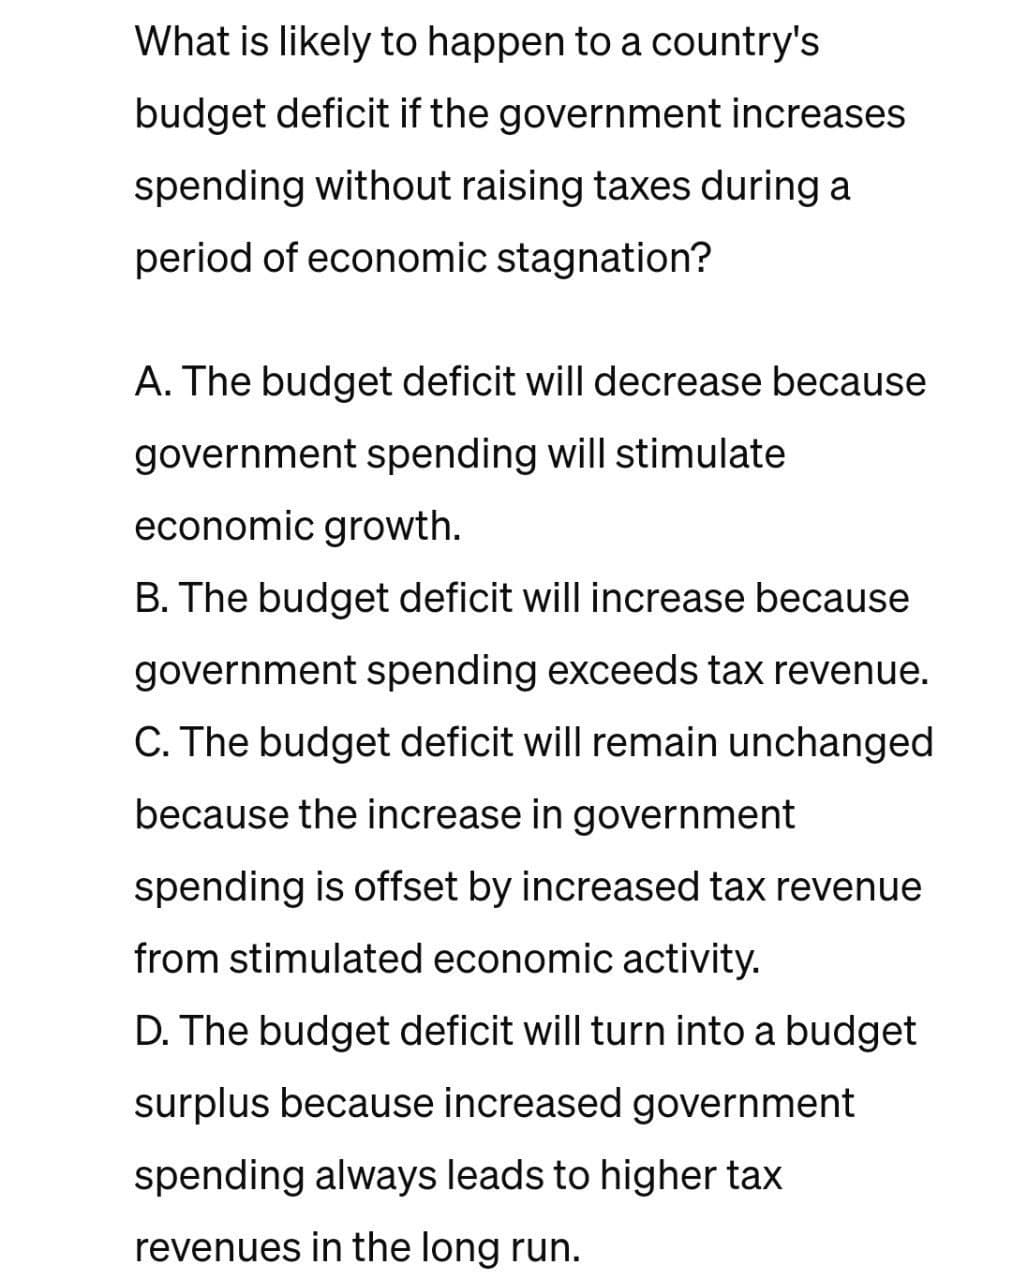 What is likely to happen to a country's
budget deficit if the government increases
spending without raising taxes during a
period of economic stagnation?
A. The budget deficit will decrease because
government spending will stimulate
economic growth.
B. The budget deficit will increase because
government spending exceeds tax revenue.
C. The budget deficit will remain unchanged
because the increase in government
spending is offset by increased tax revenue
from stimulated economic activity.
D. The budget deficit will turn into a budget
surplus because increased government
spending always leads to higher tax
revenues in the long run.